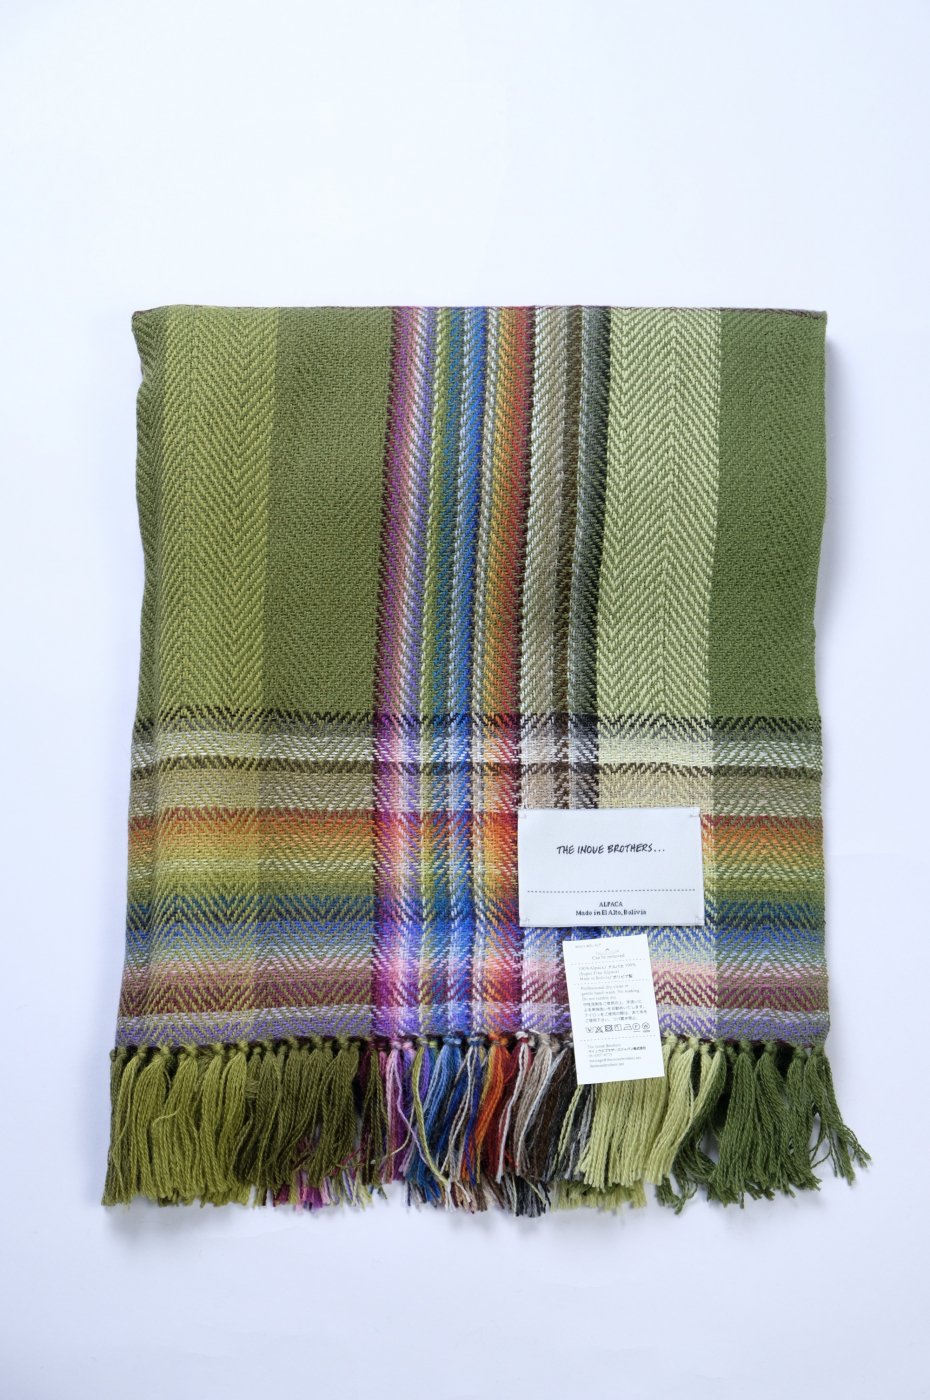 THE INOUE BROTHERS... "Multi Coloured Scarf/GREEN"